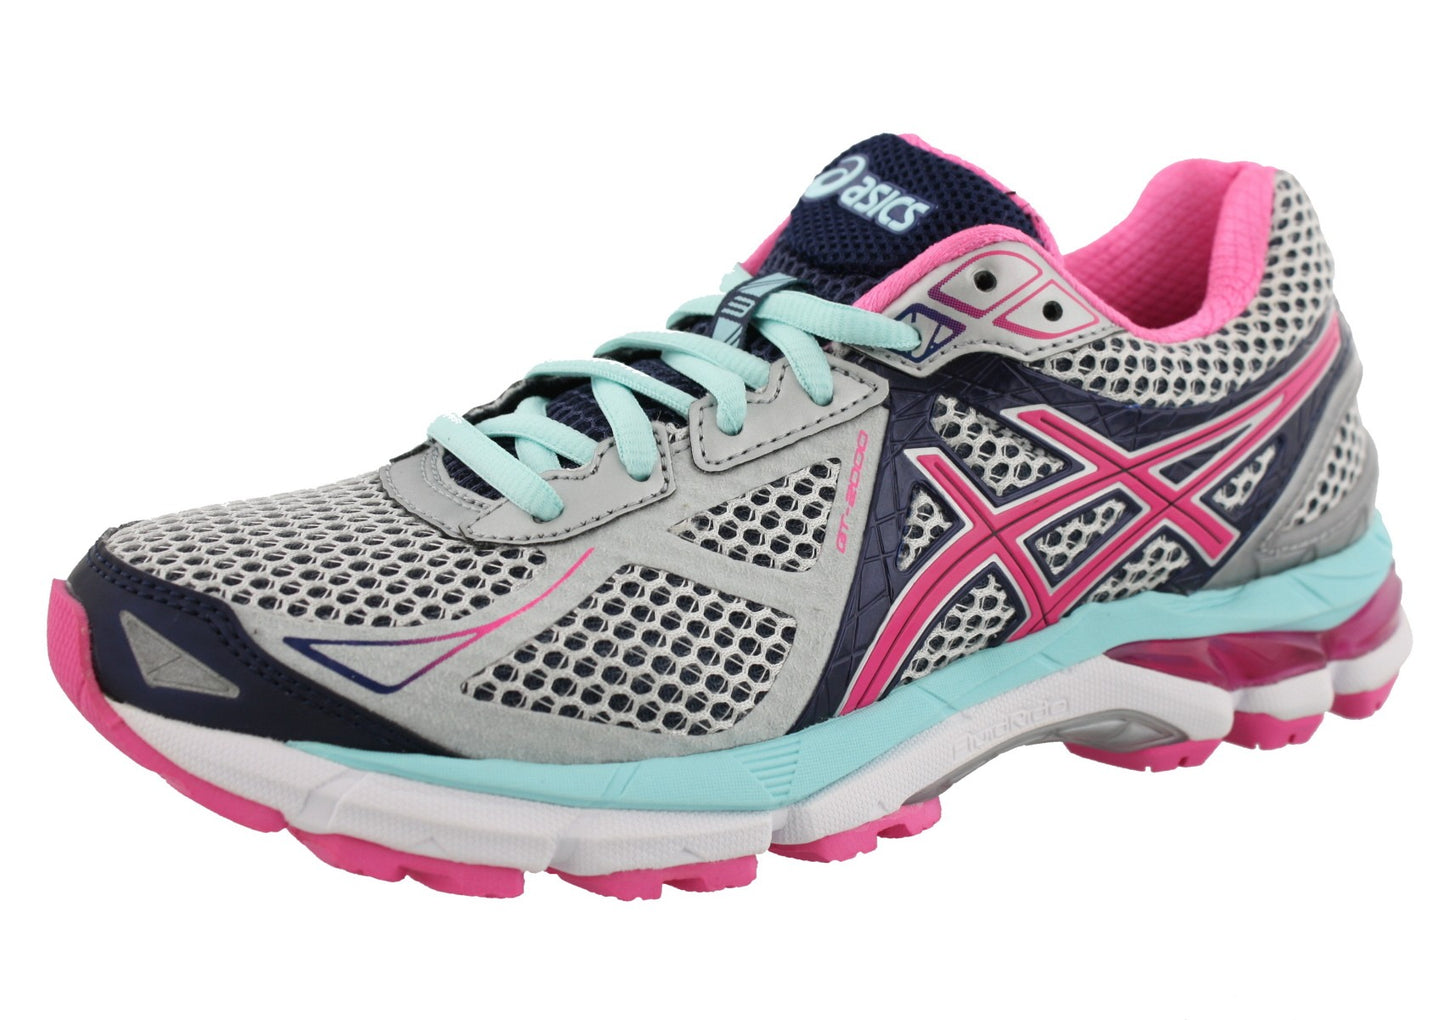 Lateral of Lightning/HotPink/Navy5327 ASICS Women Walking Trail Cushioned Running Sneakers